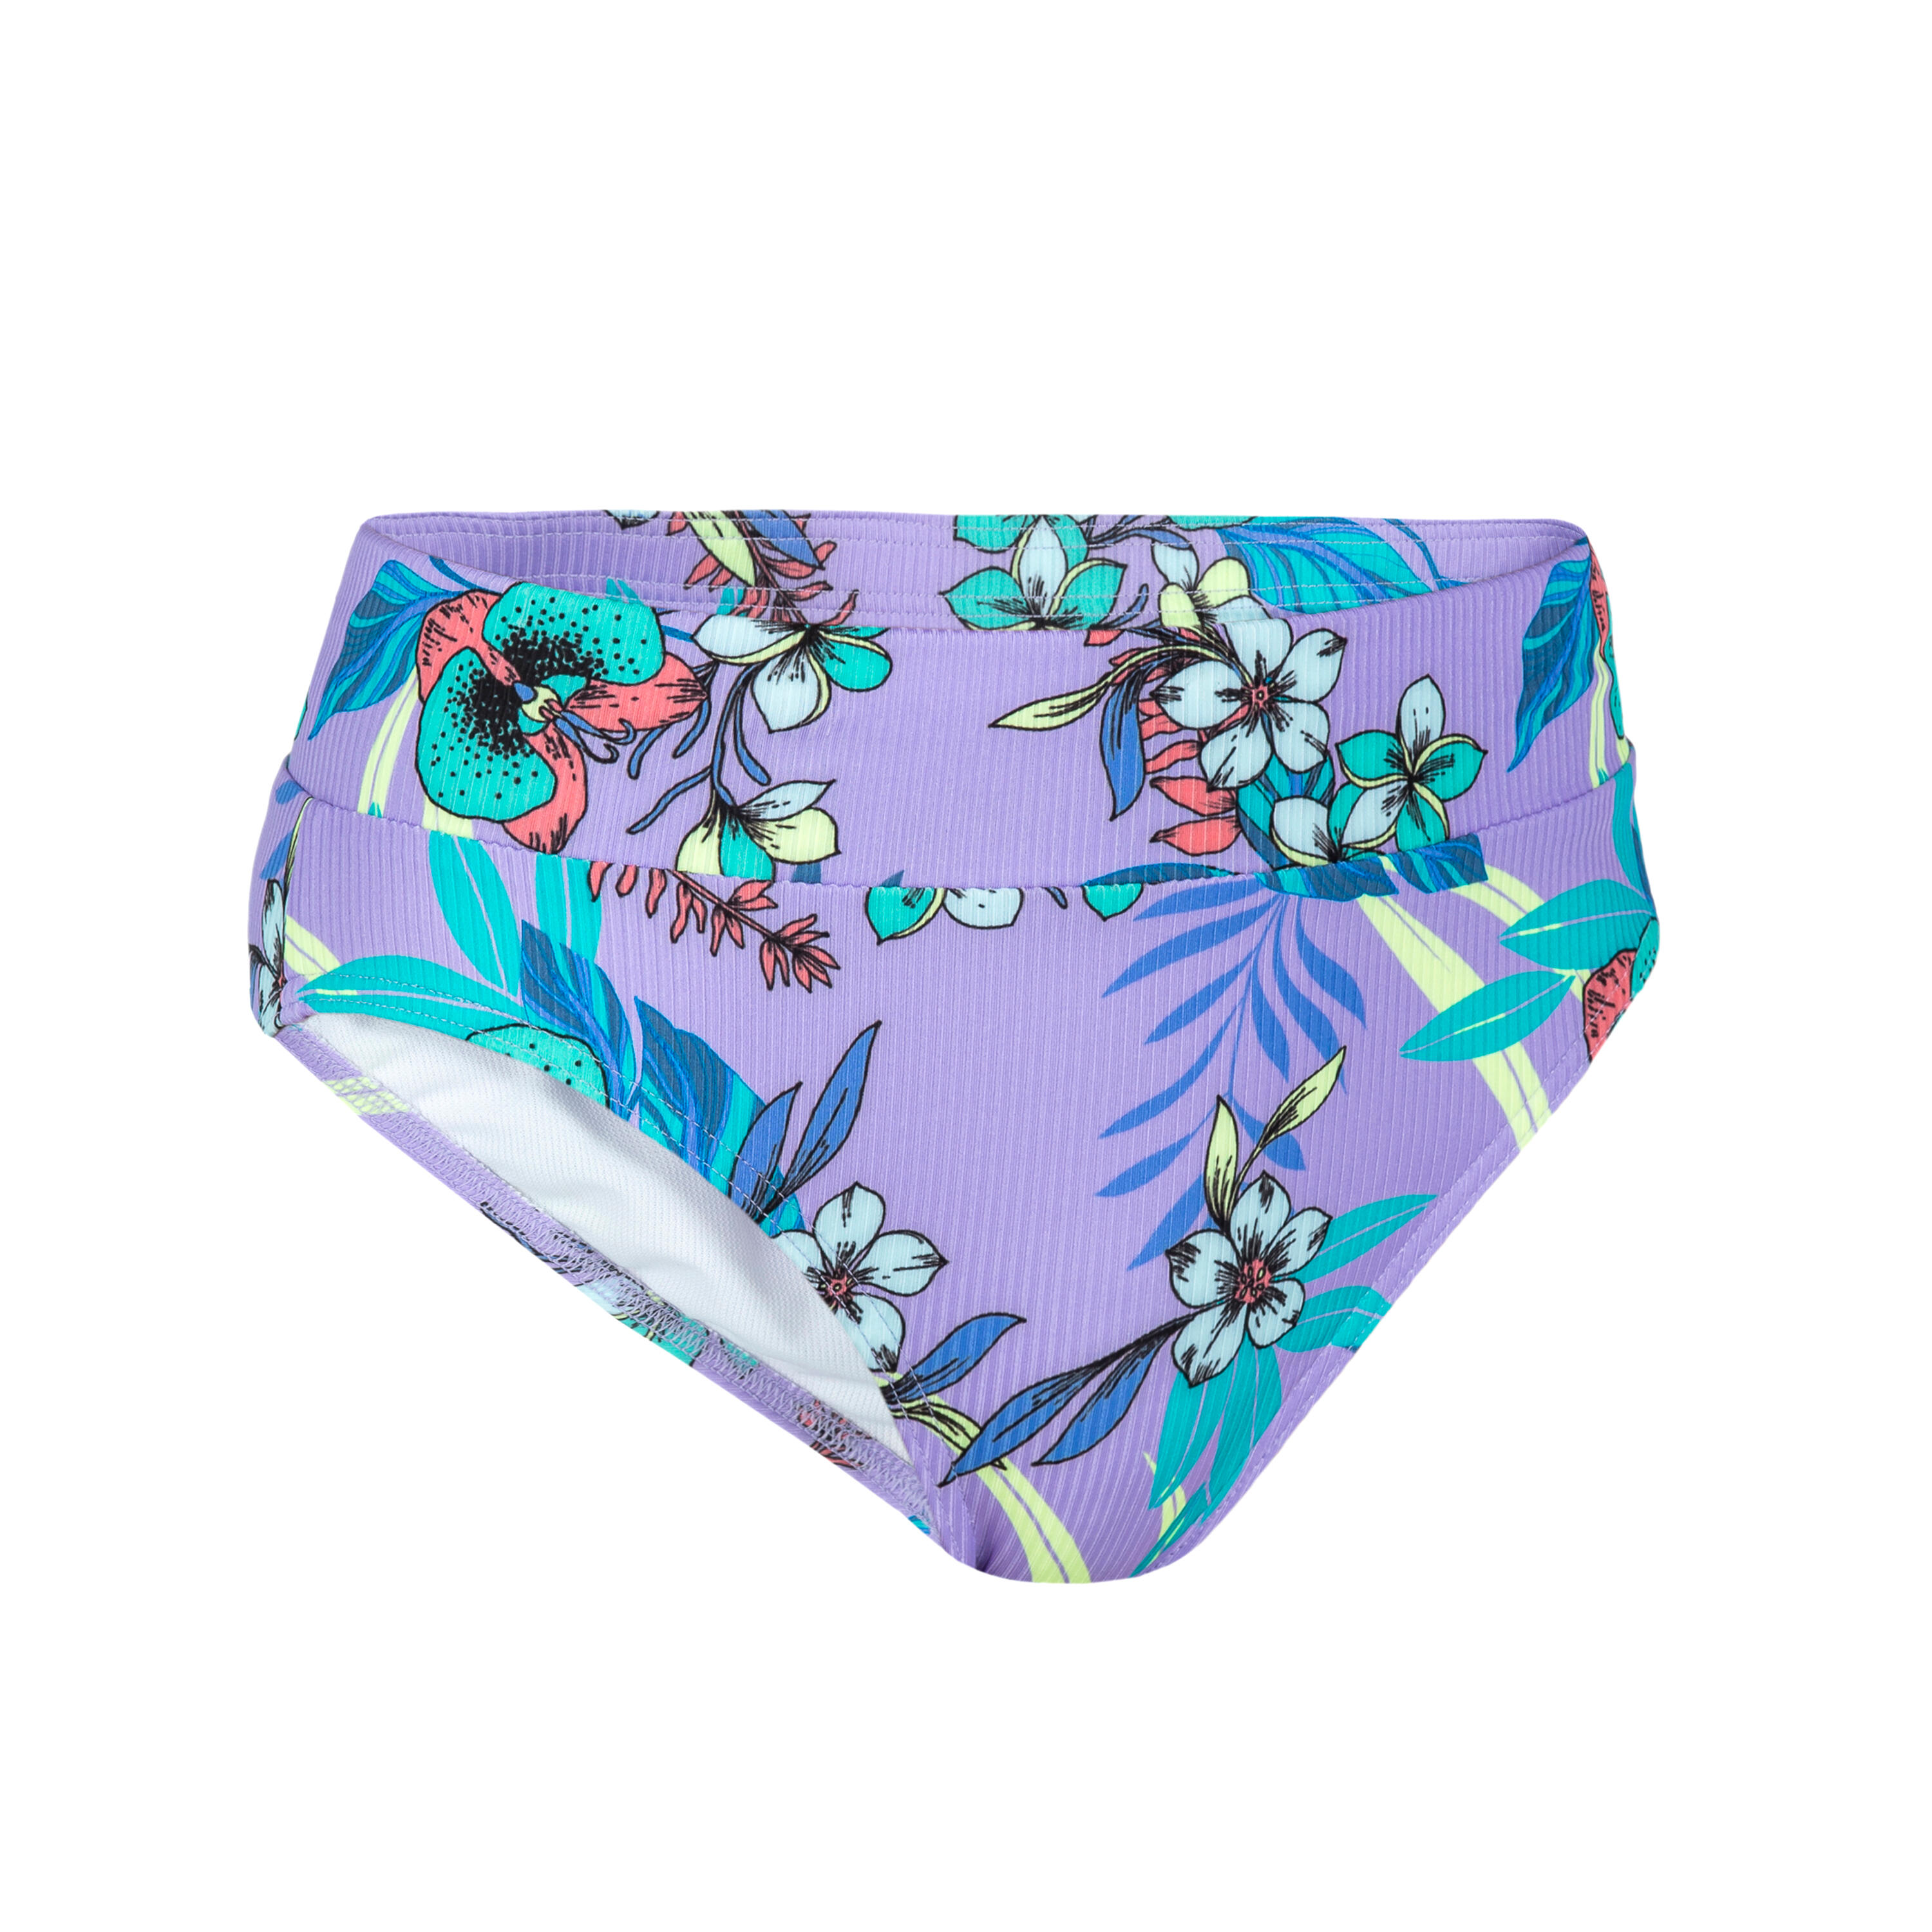 OLAIAN Girl's textured swimsuit bottoms - 500 Bao orchid purple